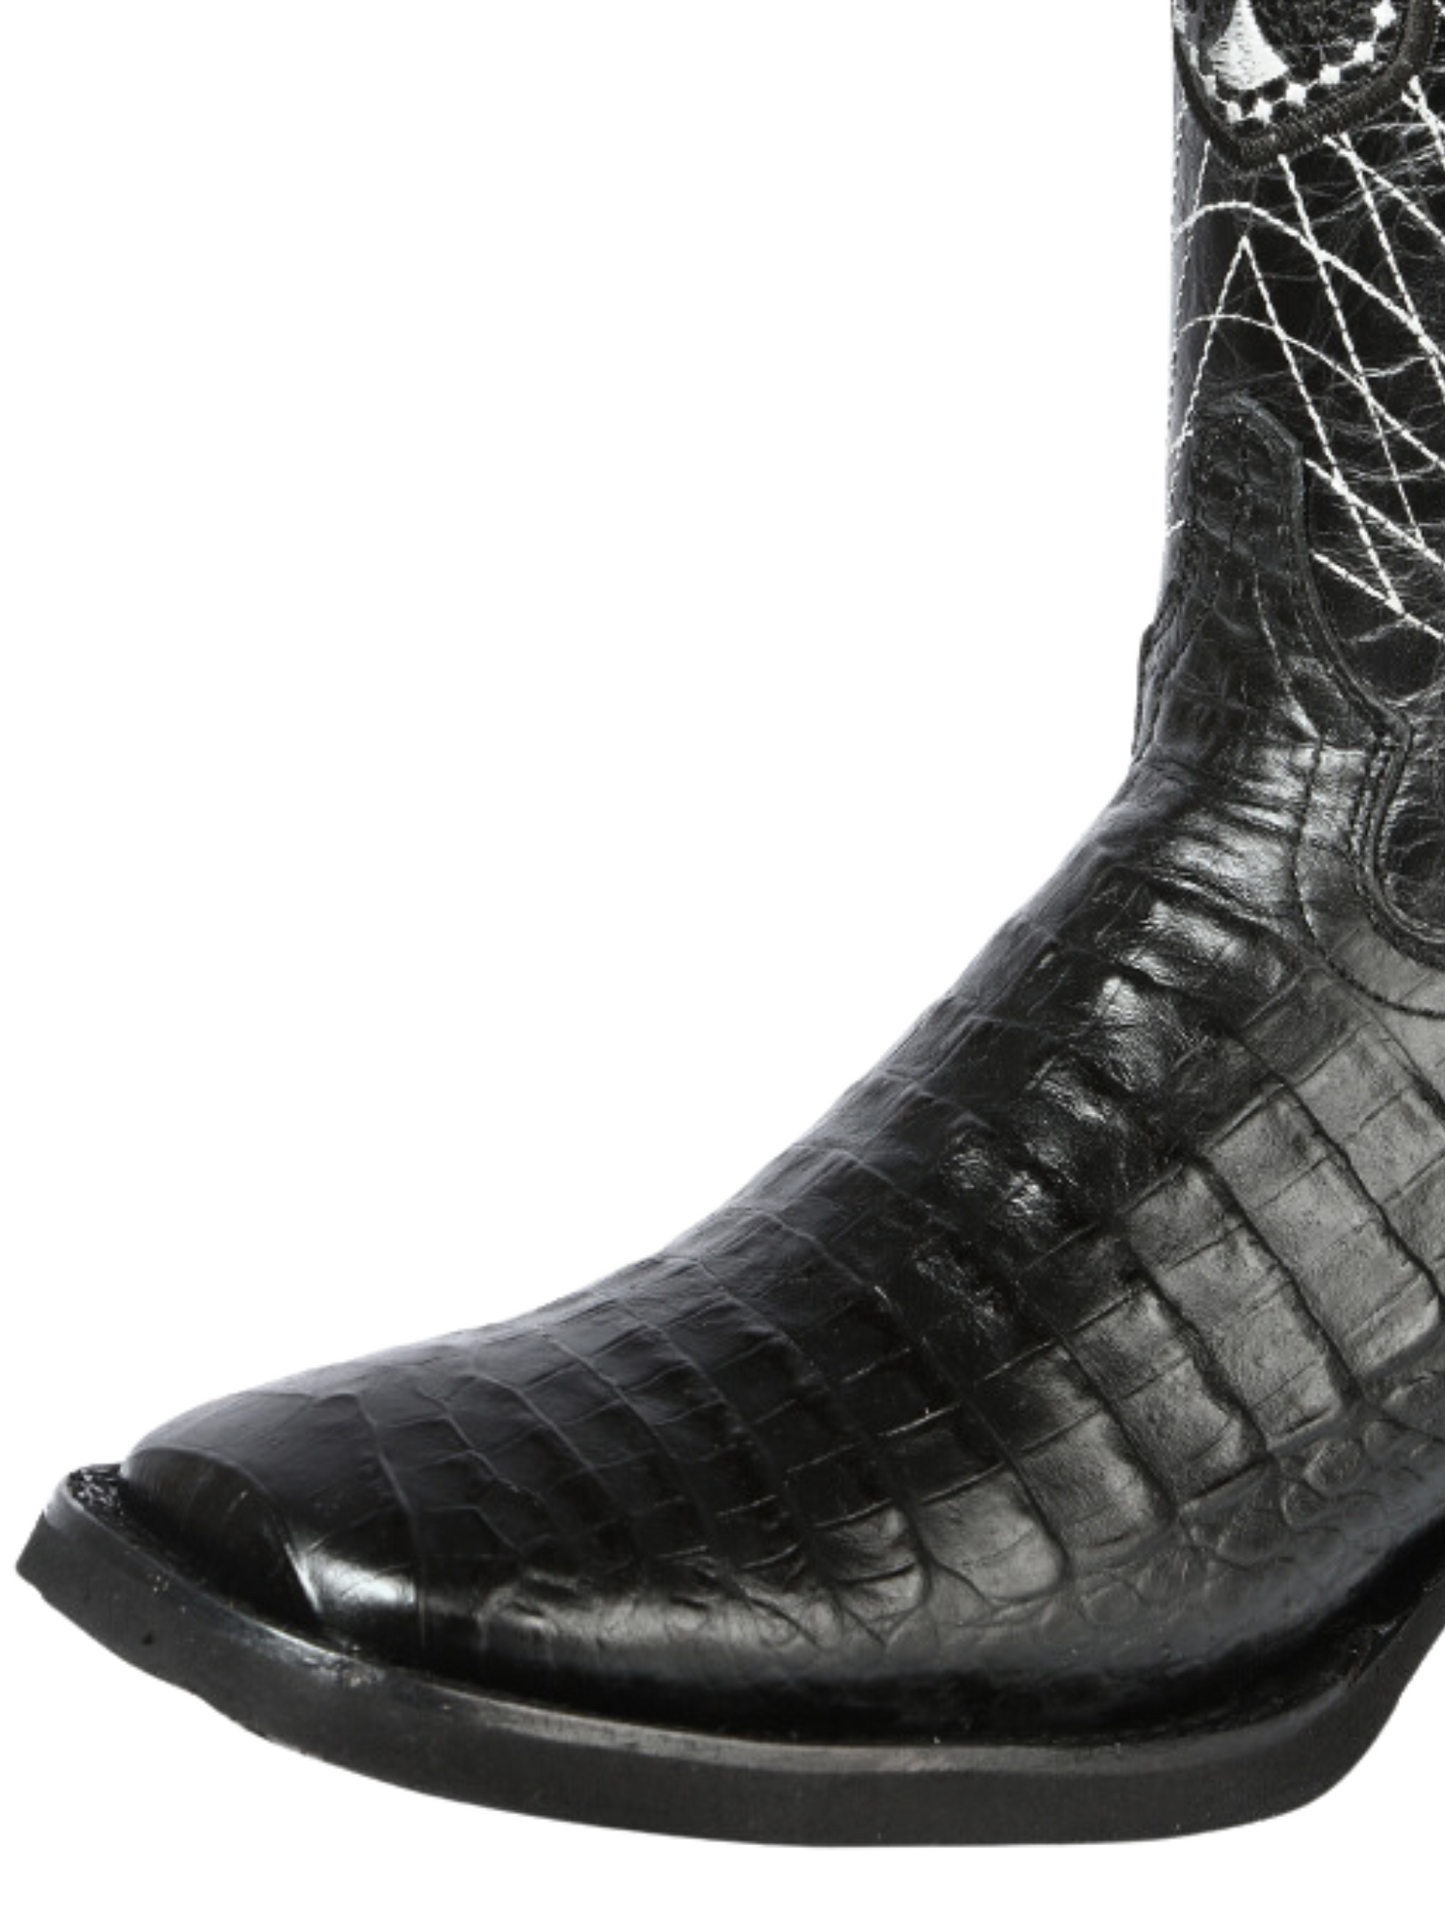 Rodeo Cowboy Boots Imitation of Caiman Belly Engraved in Cowhide Leather for Men 'El General' - ID: 44671 Cowboy Boots El General